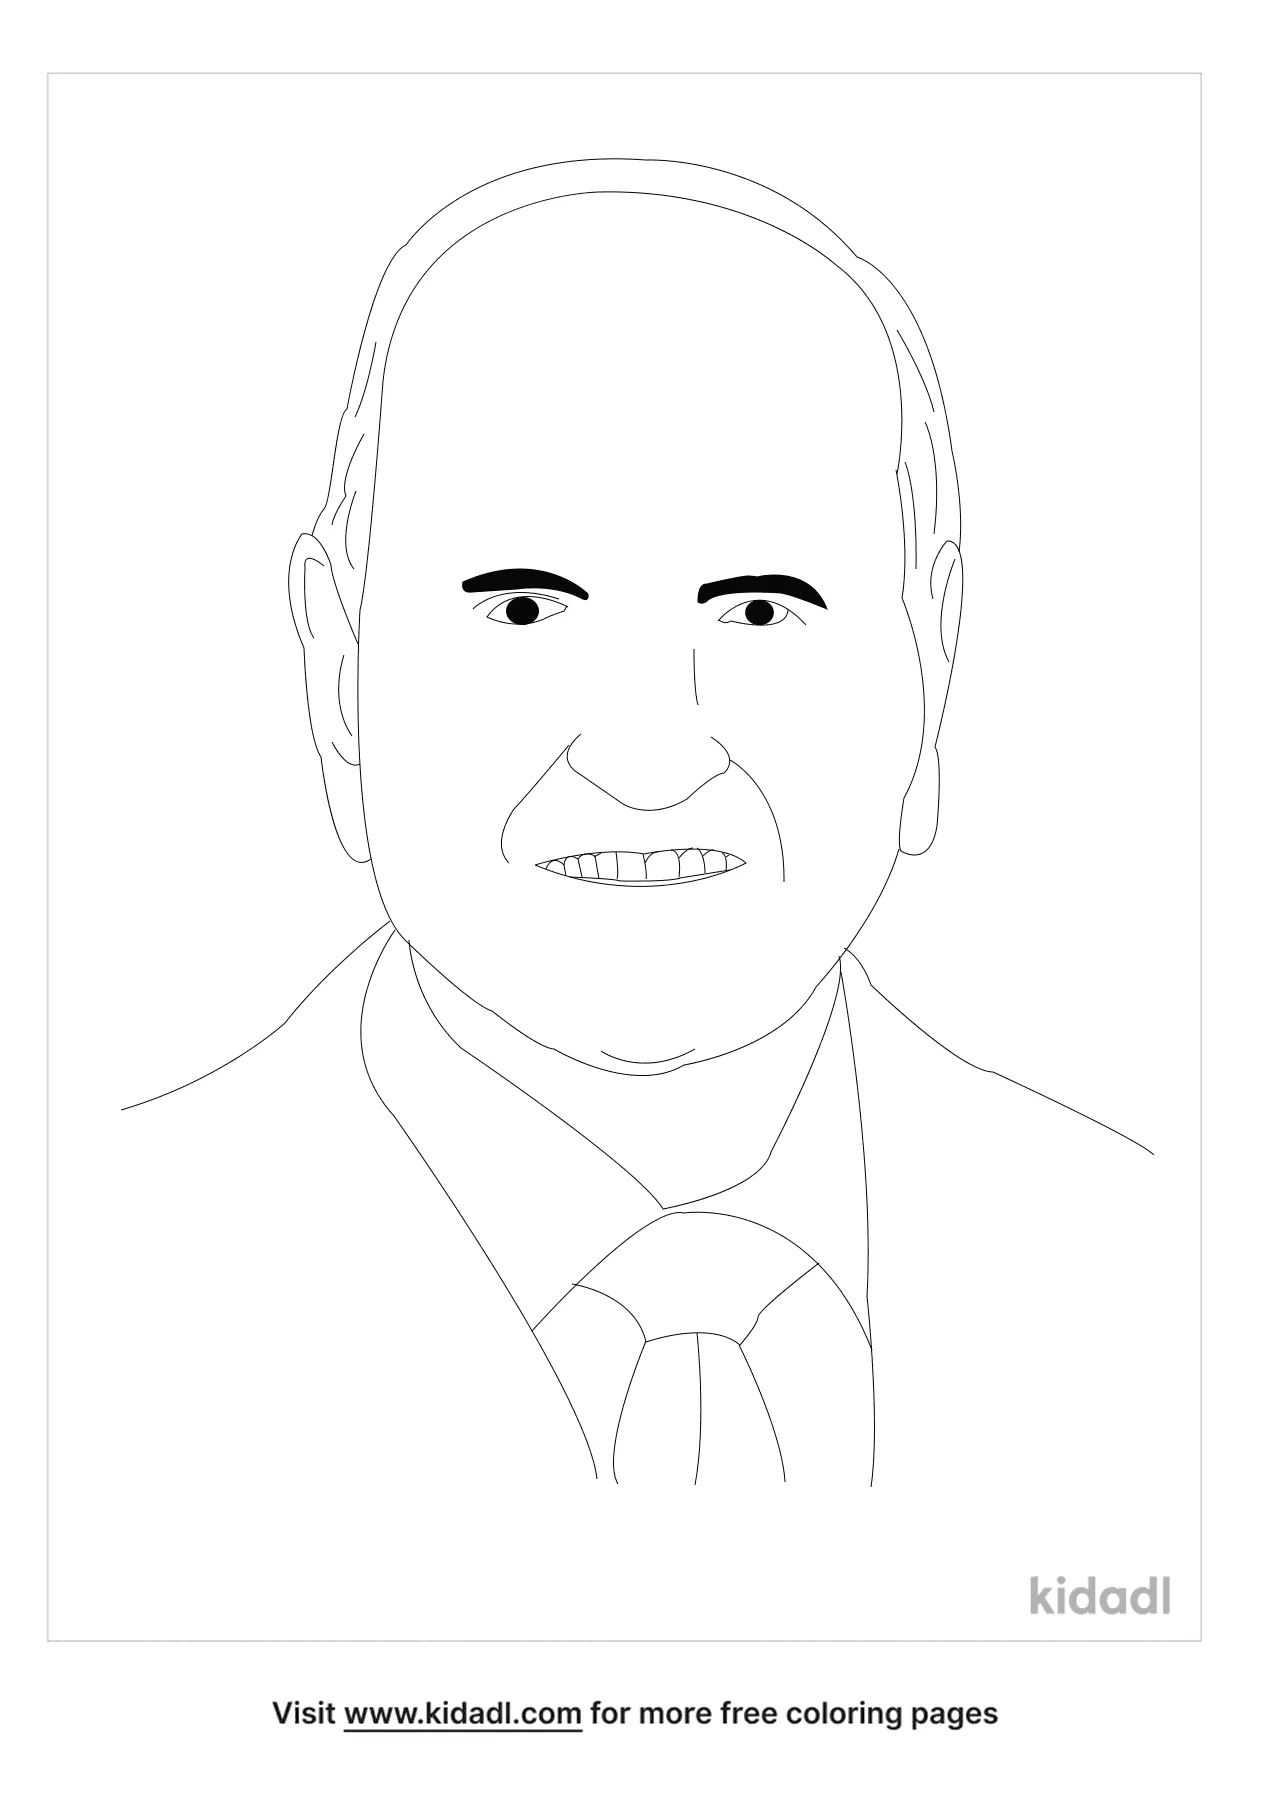 Free Russell M Nelson Coloring Page | Coloring Page Printables | Kidadl